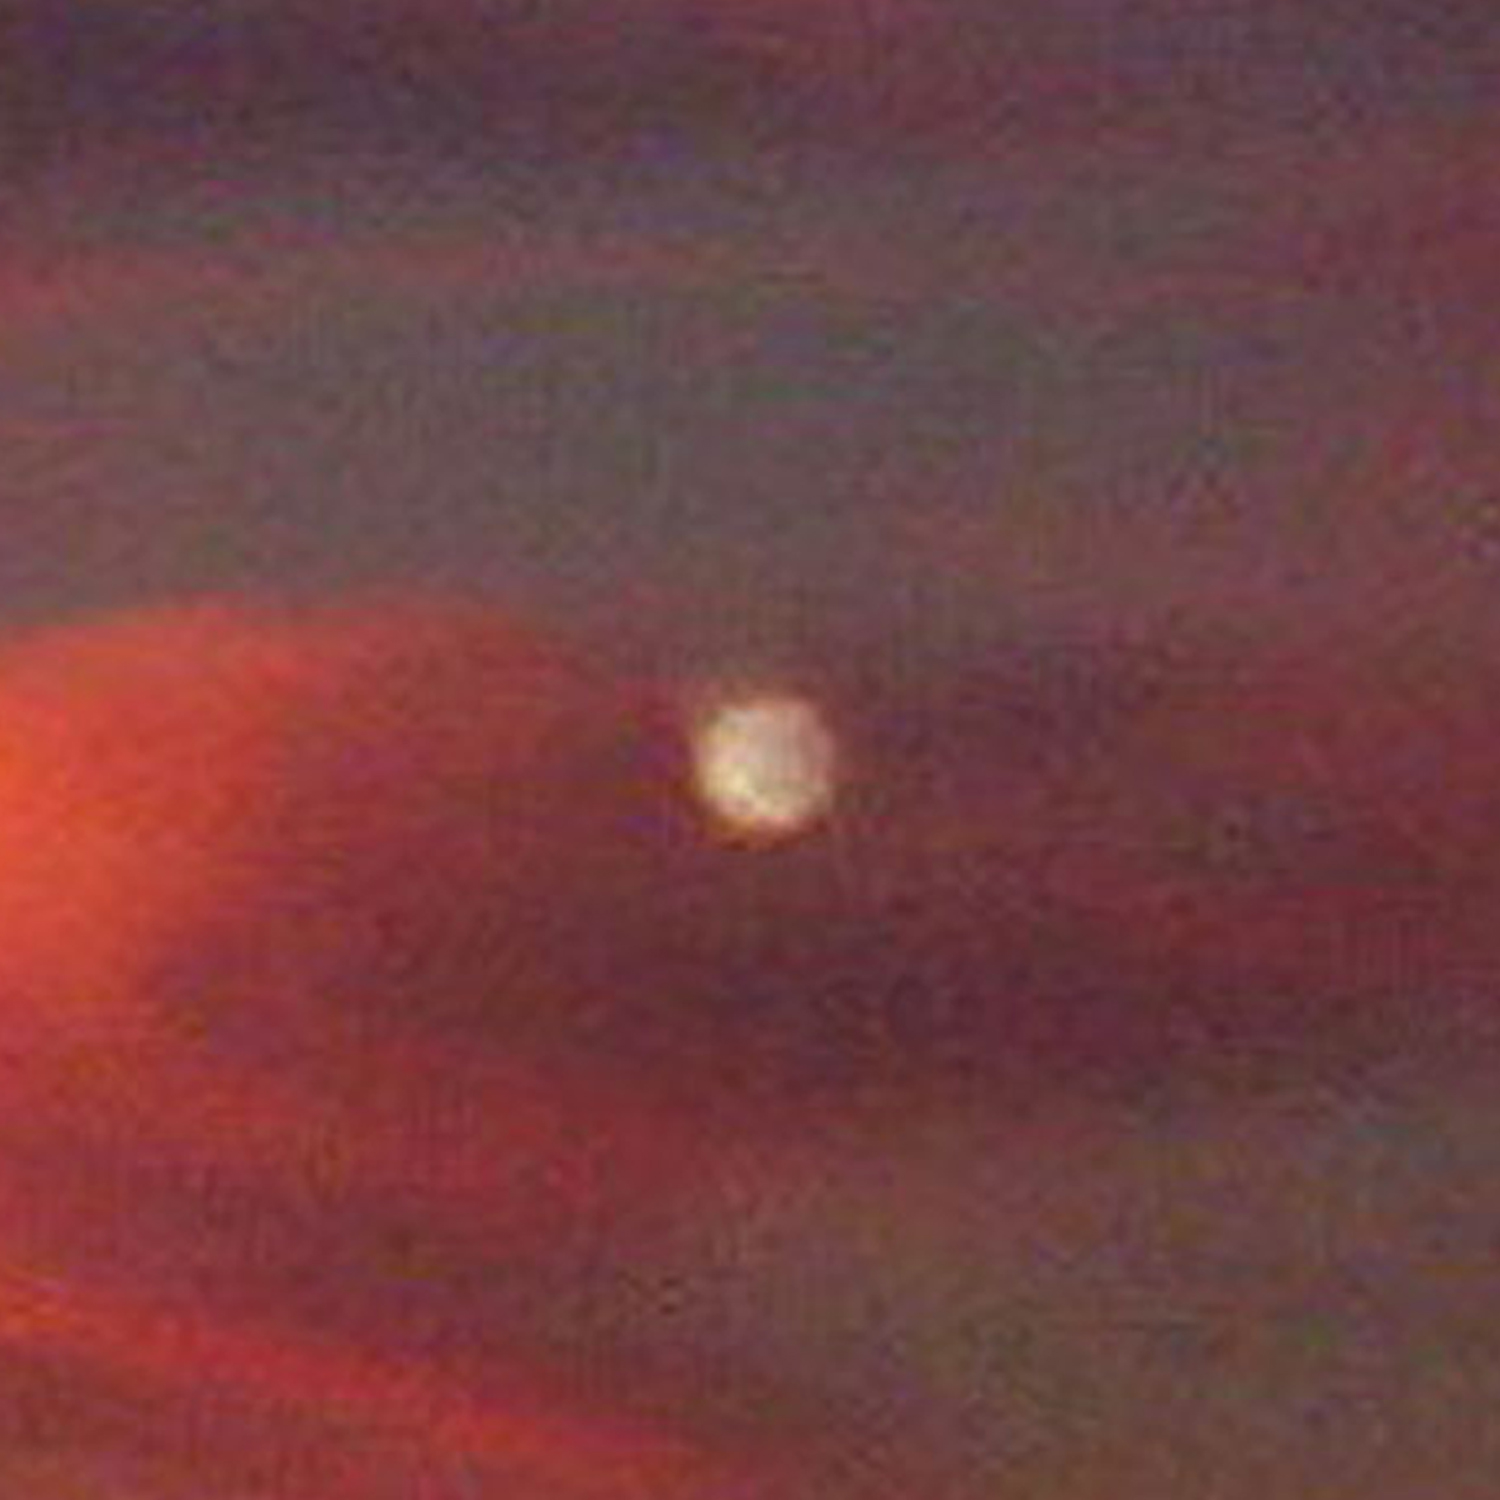 UFO picture shot on dusk at Waroona in the Peel region of Australia UFO Picture #145-4